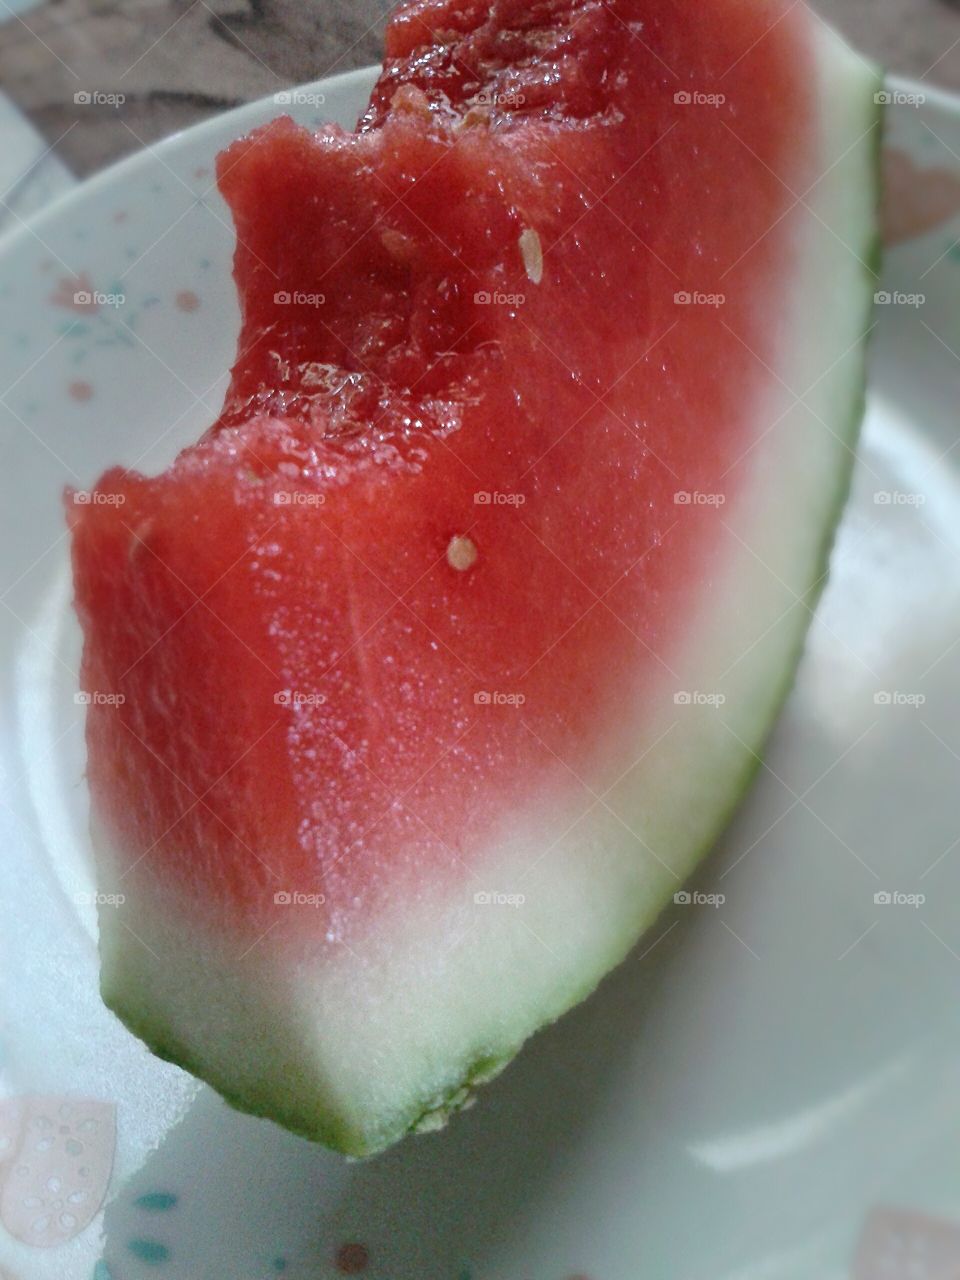 Tasty watermelon. The quench of watermelon is irresistible.